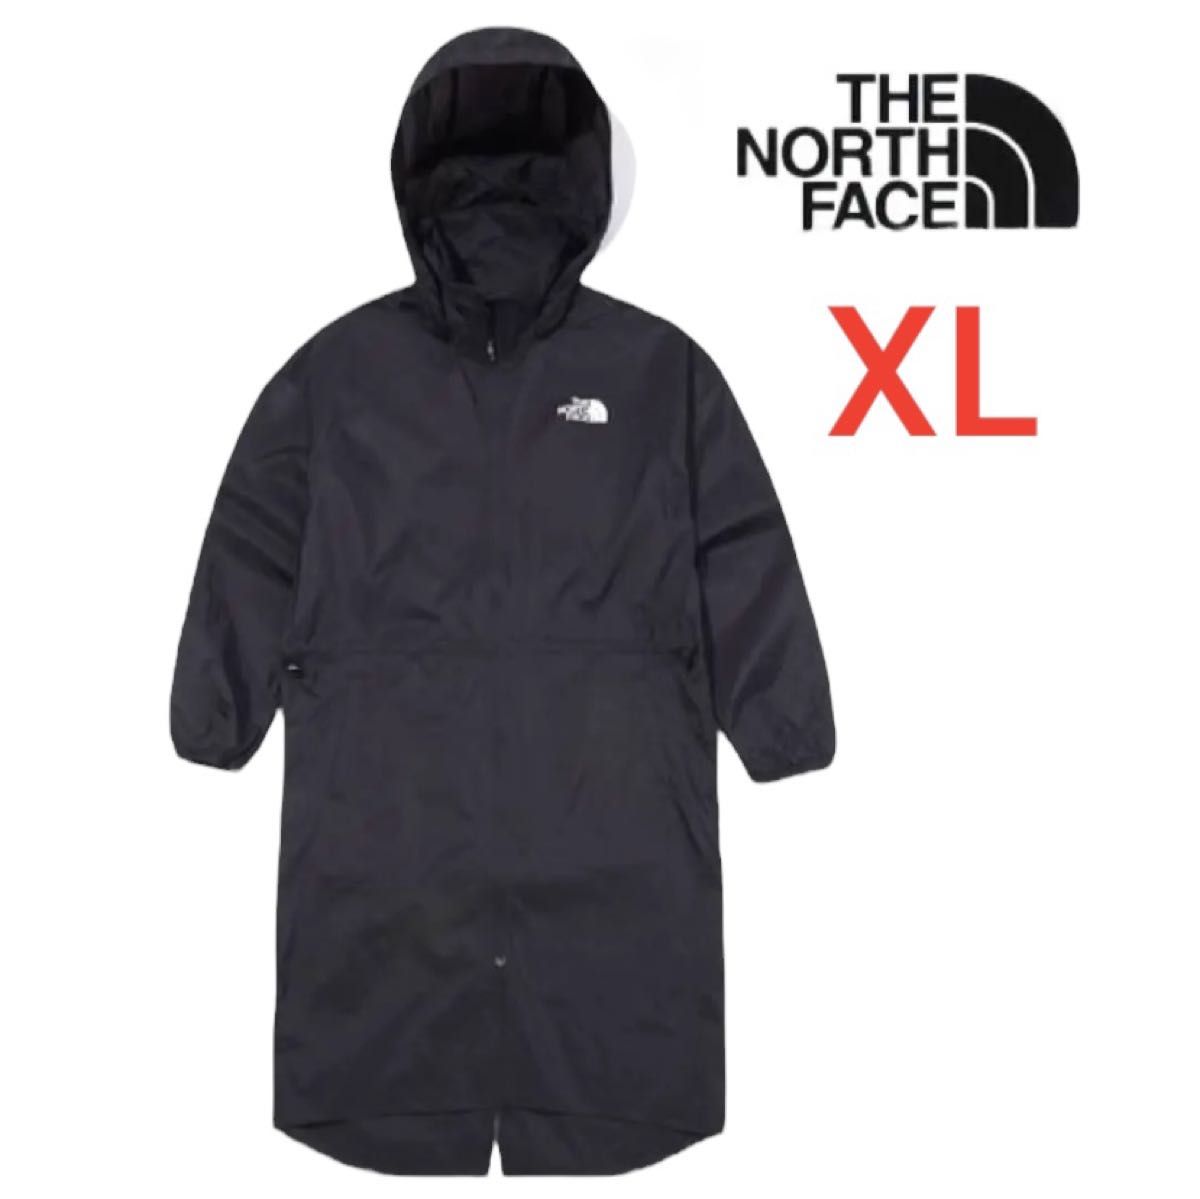 THE NORTH FACE 野村訓市 別注 GTX OVER COAT｜PayPayフリマ